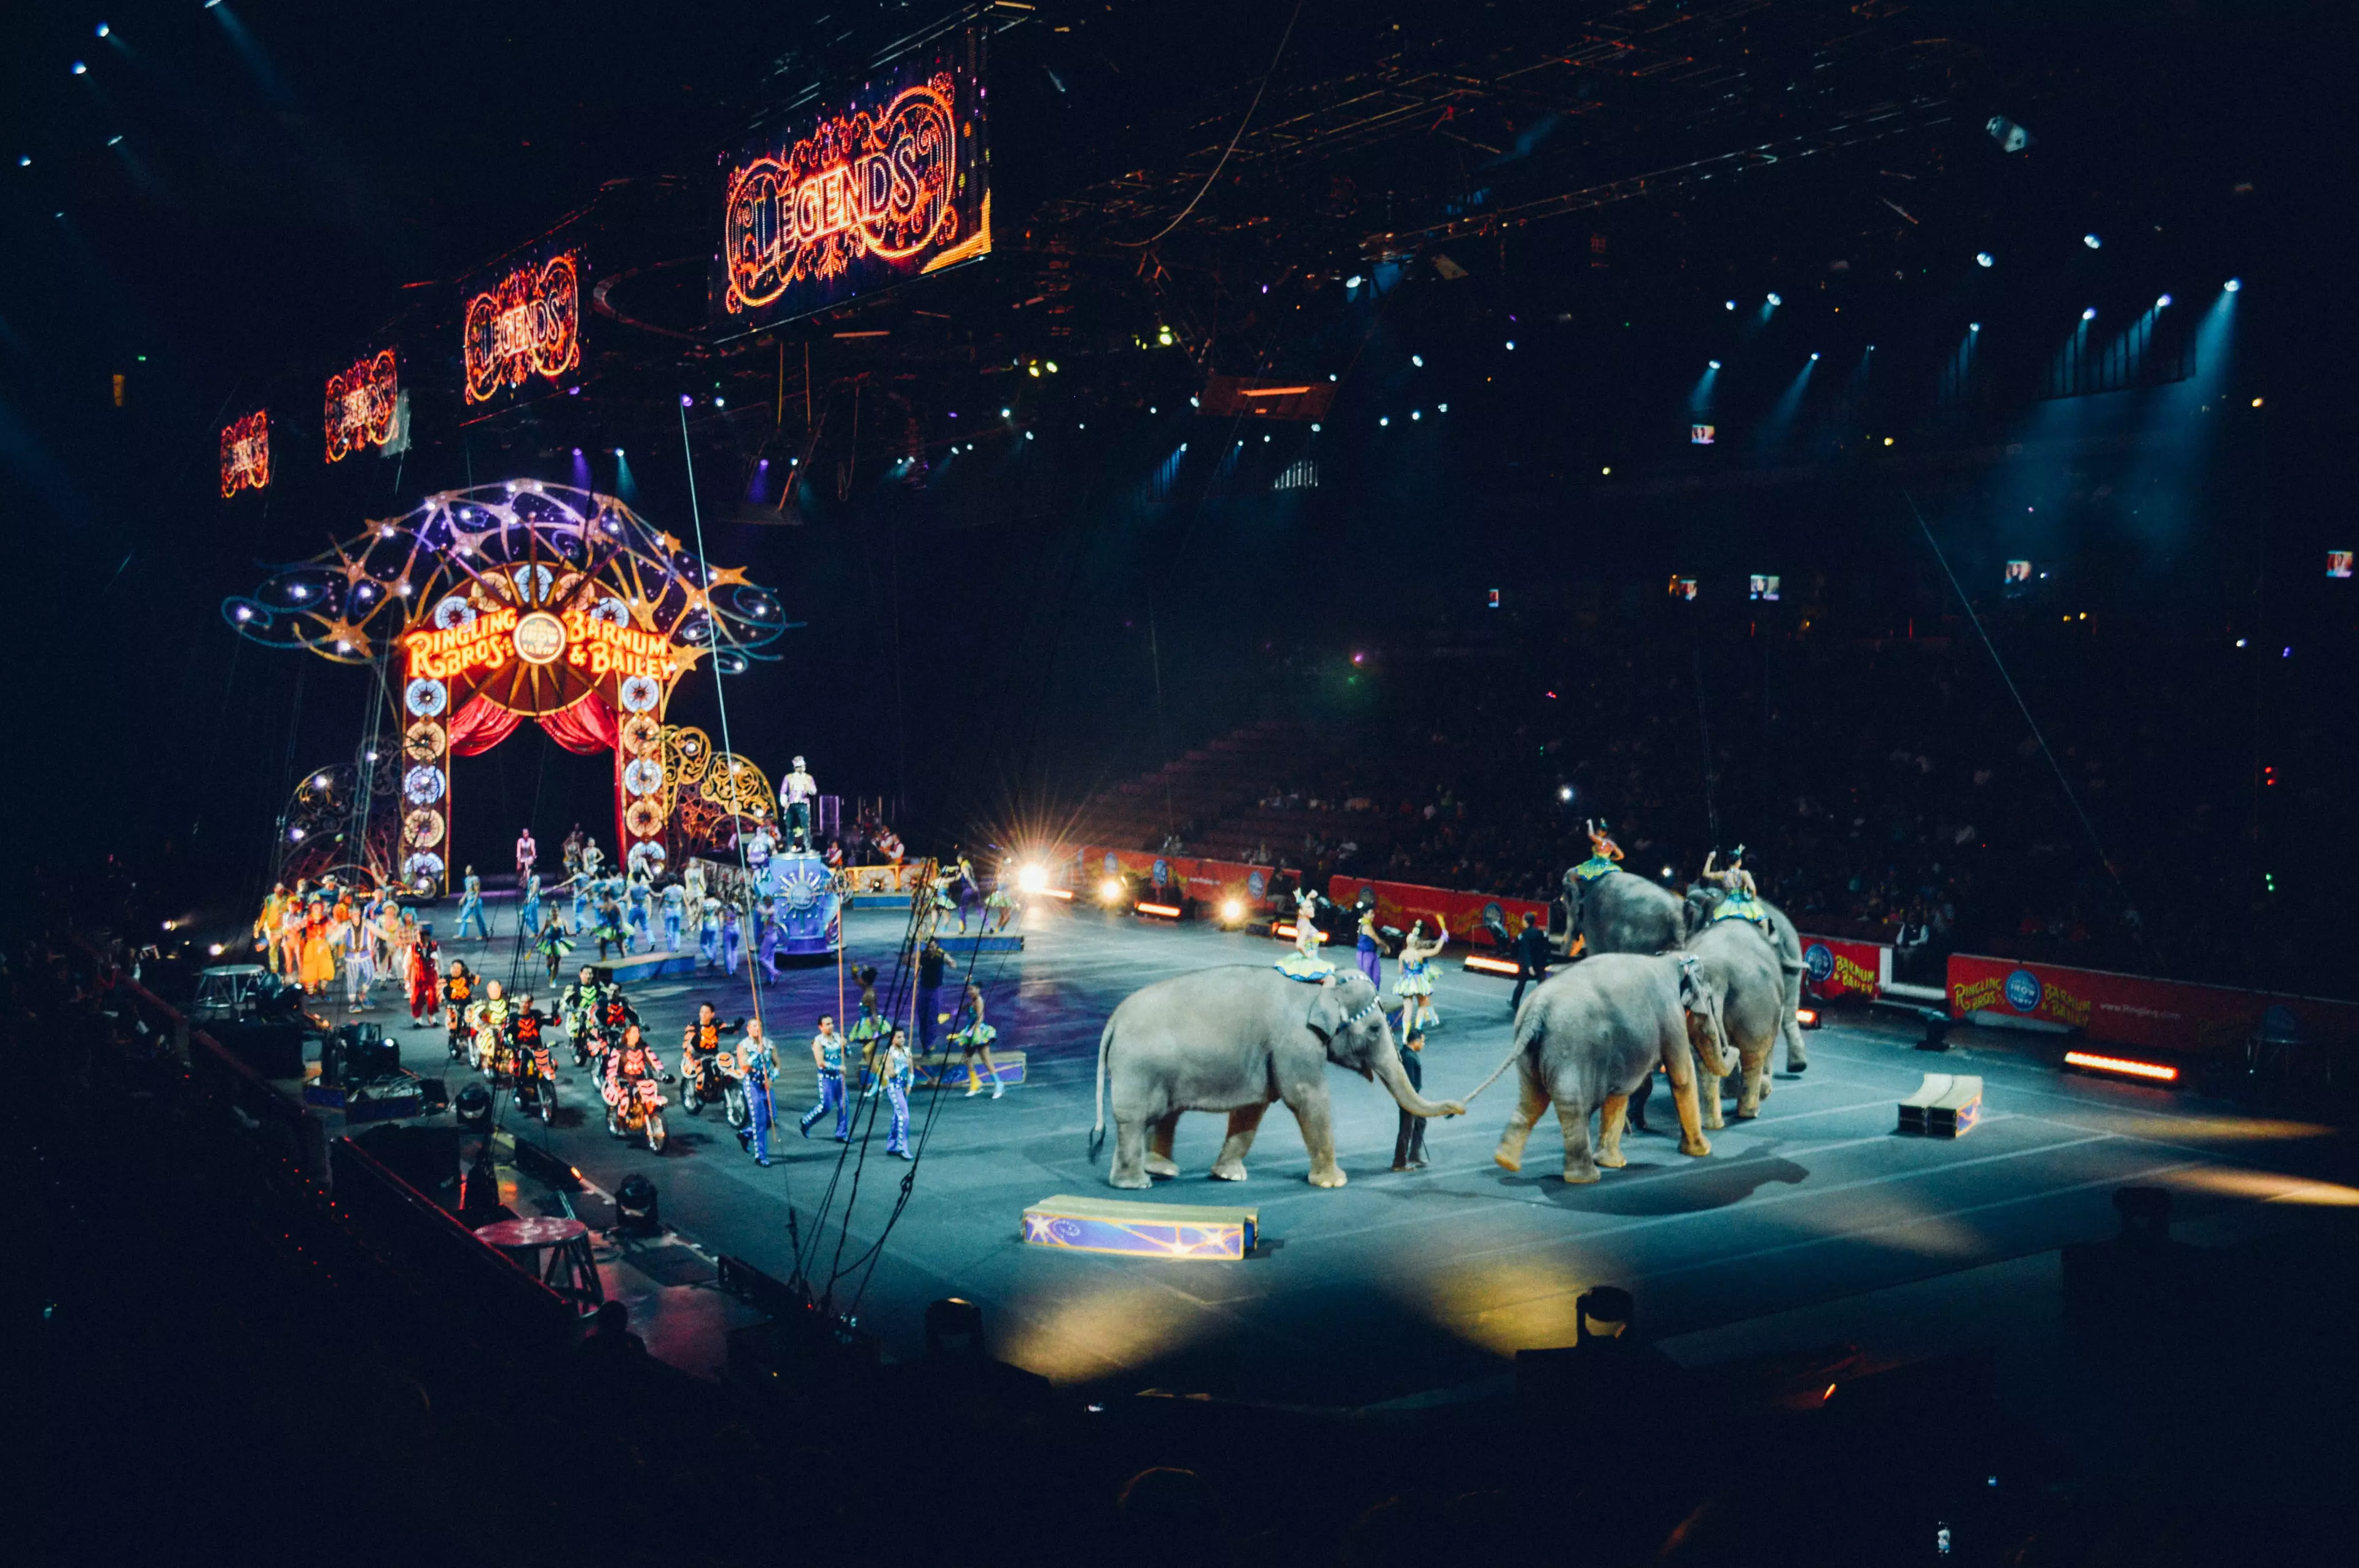 Wild animals will be banned from ravelling circuses (